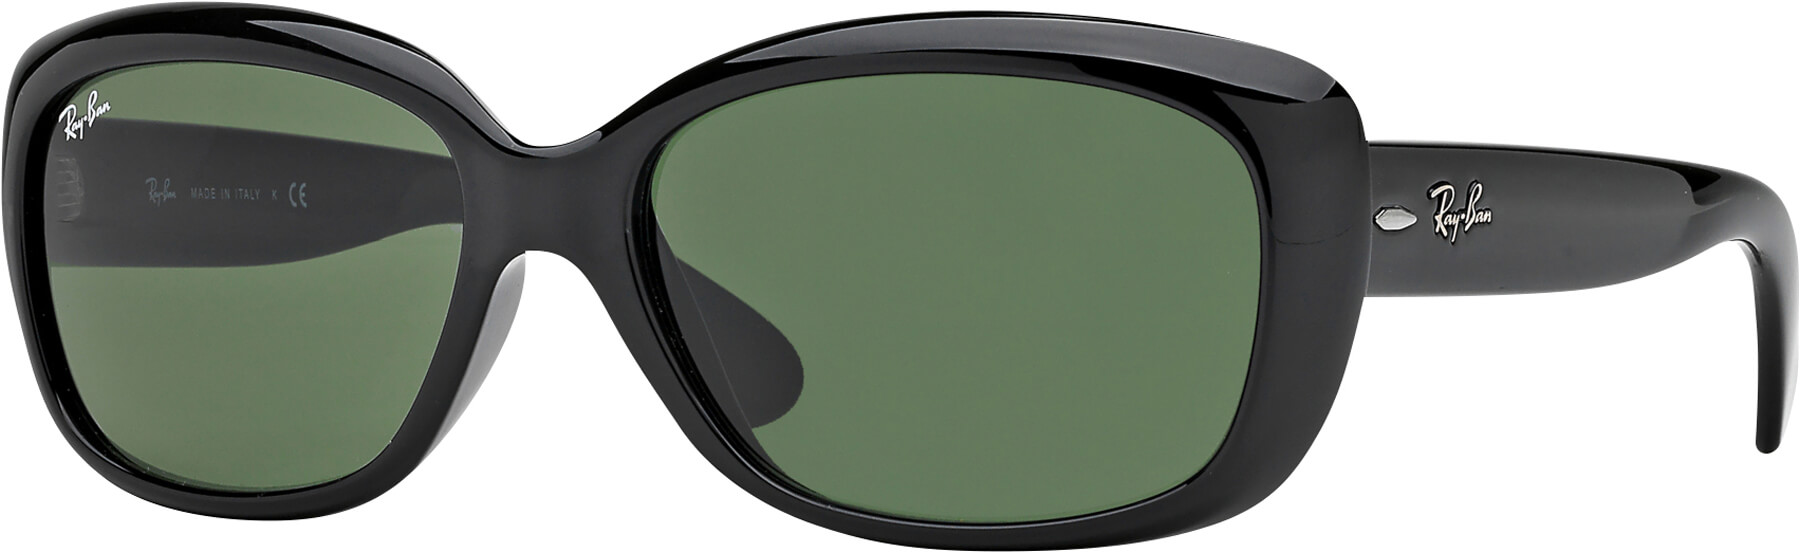 Ray-Ban JACKIE OHH 4101 image number null